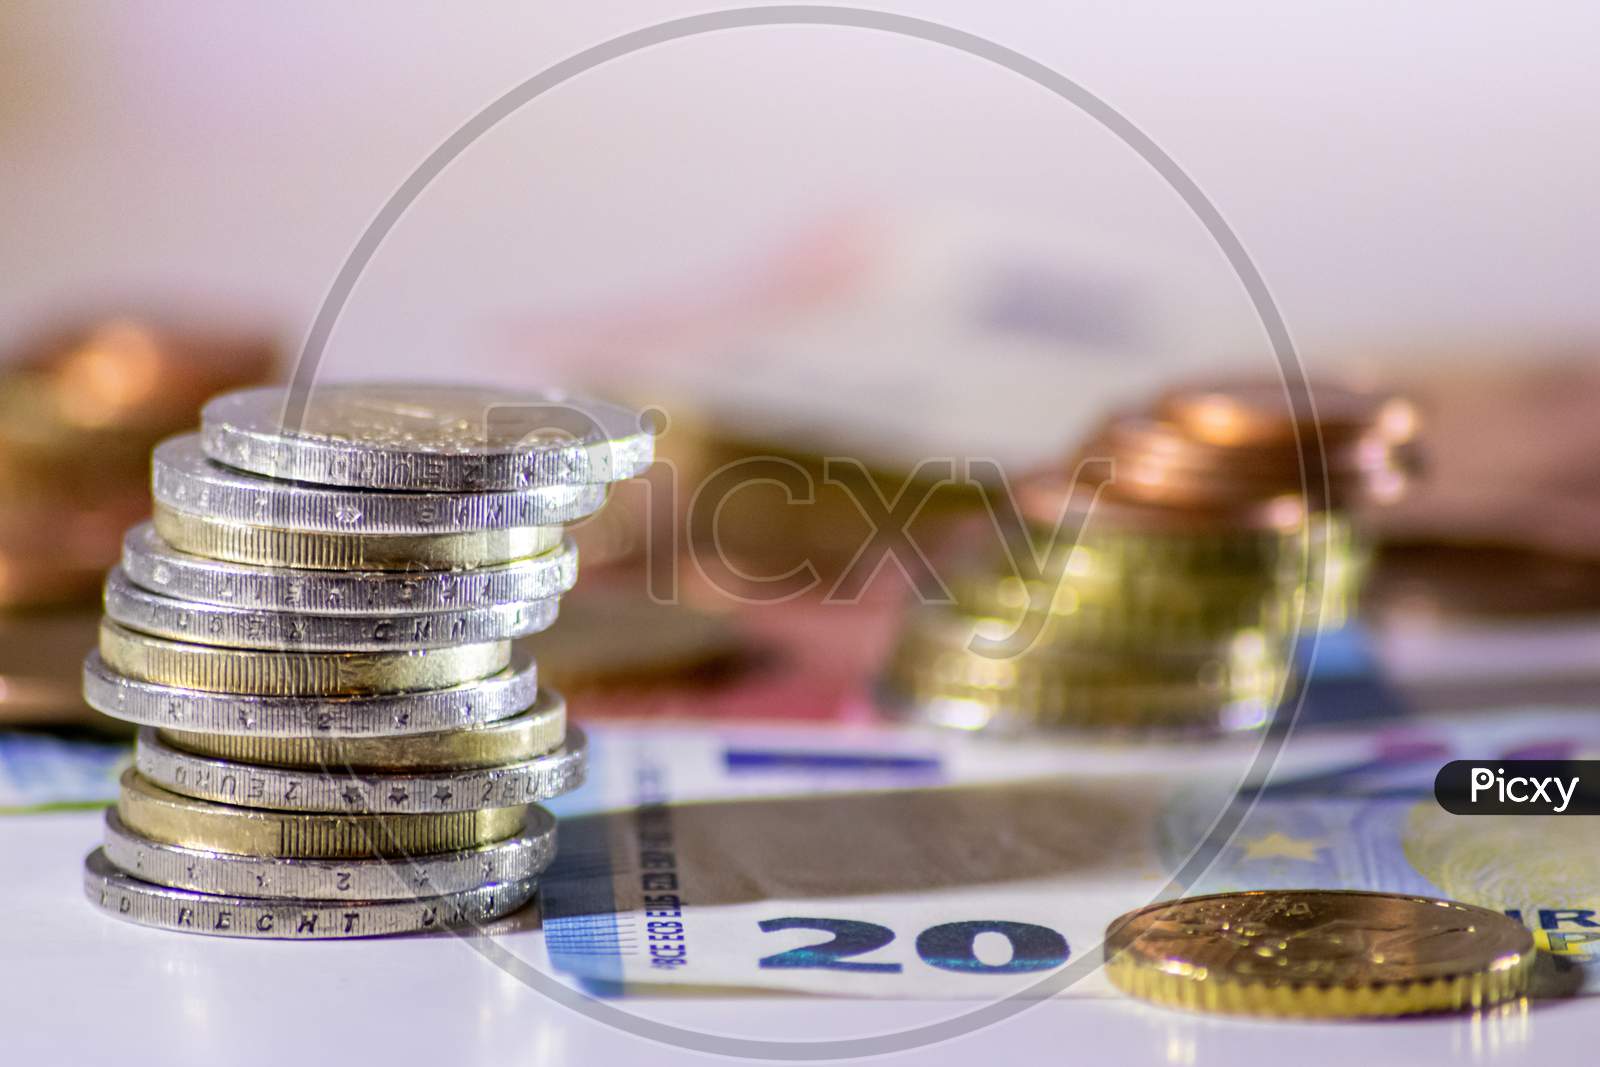 Bunch of european money with coins and bank notes show international finance with euro and europe, bets and wins or financial success as well as credit management and professional banking